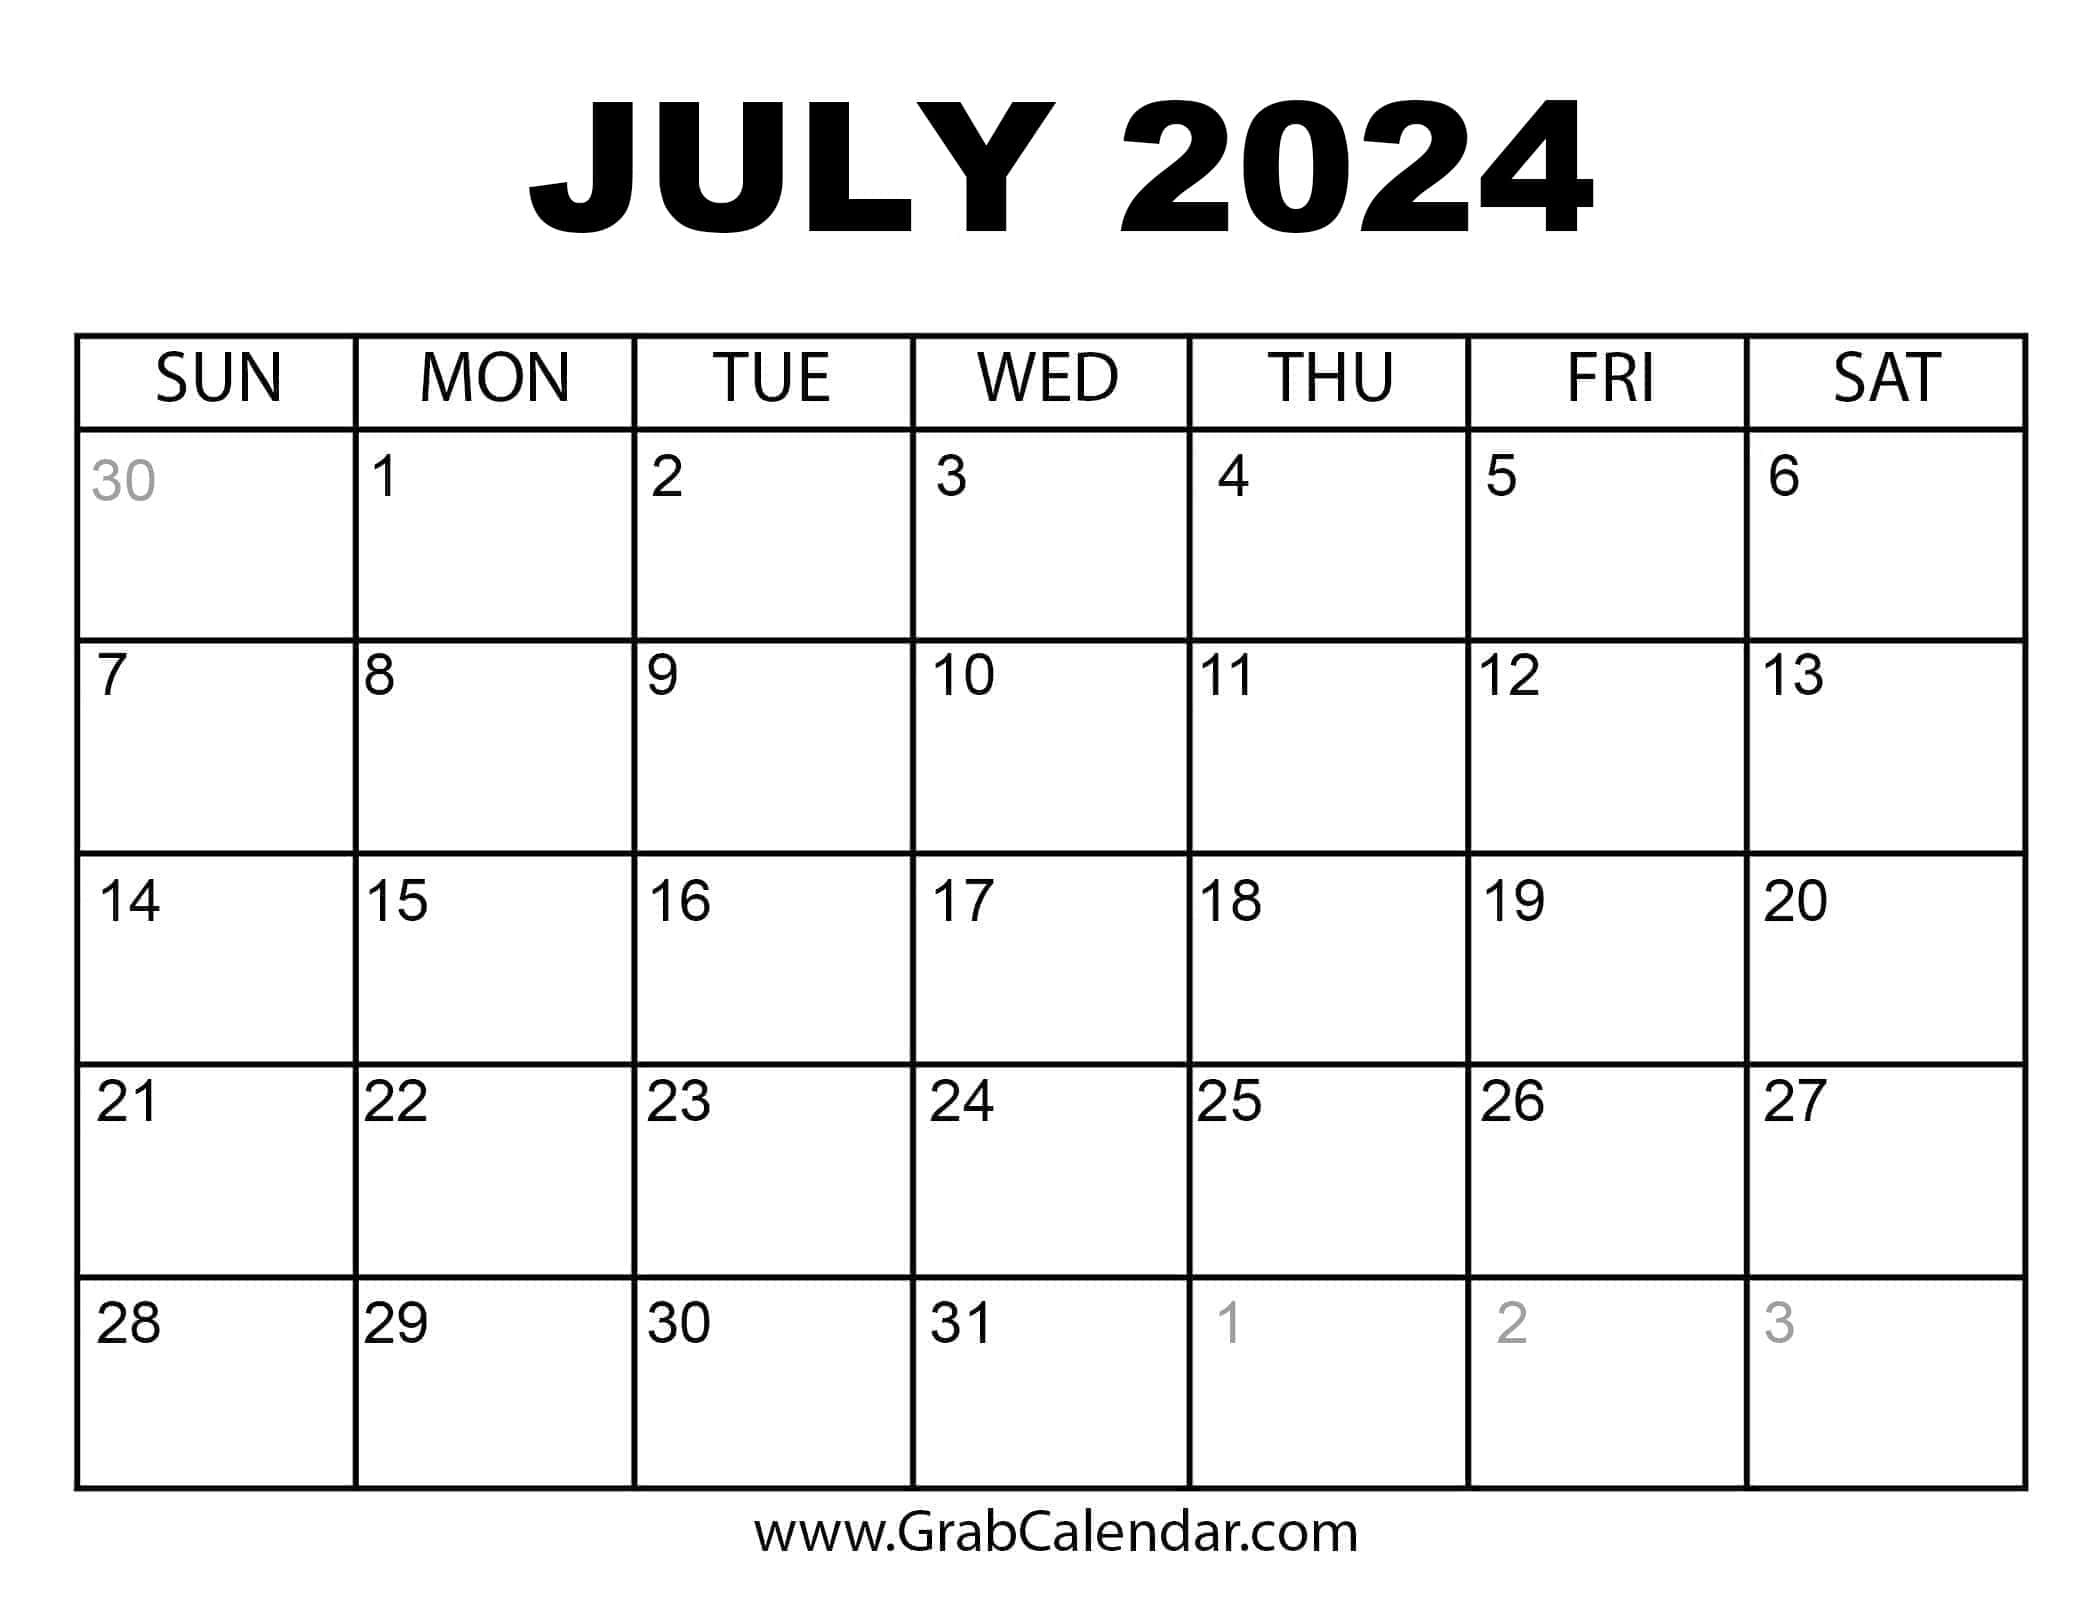 Printable July 2024 Calendar with Give Me the Calendar For the Month of July 2024